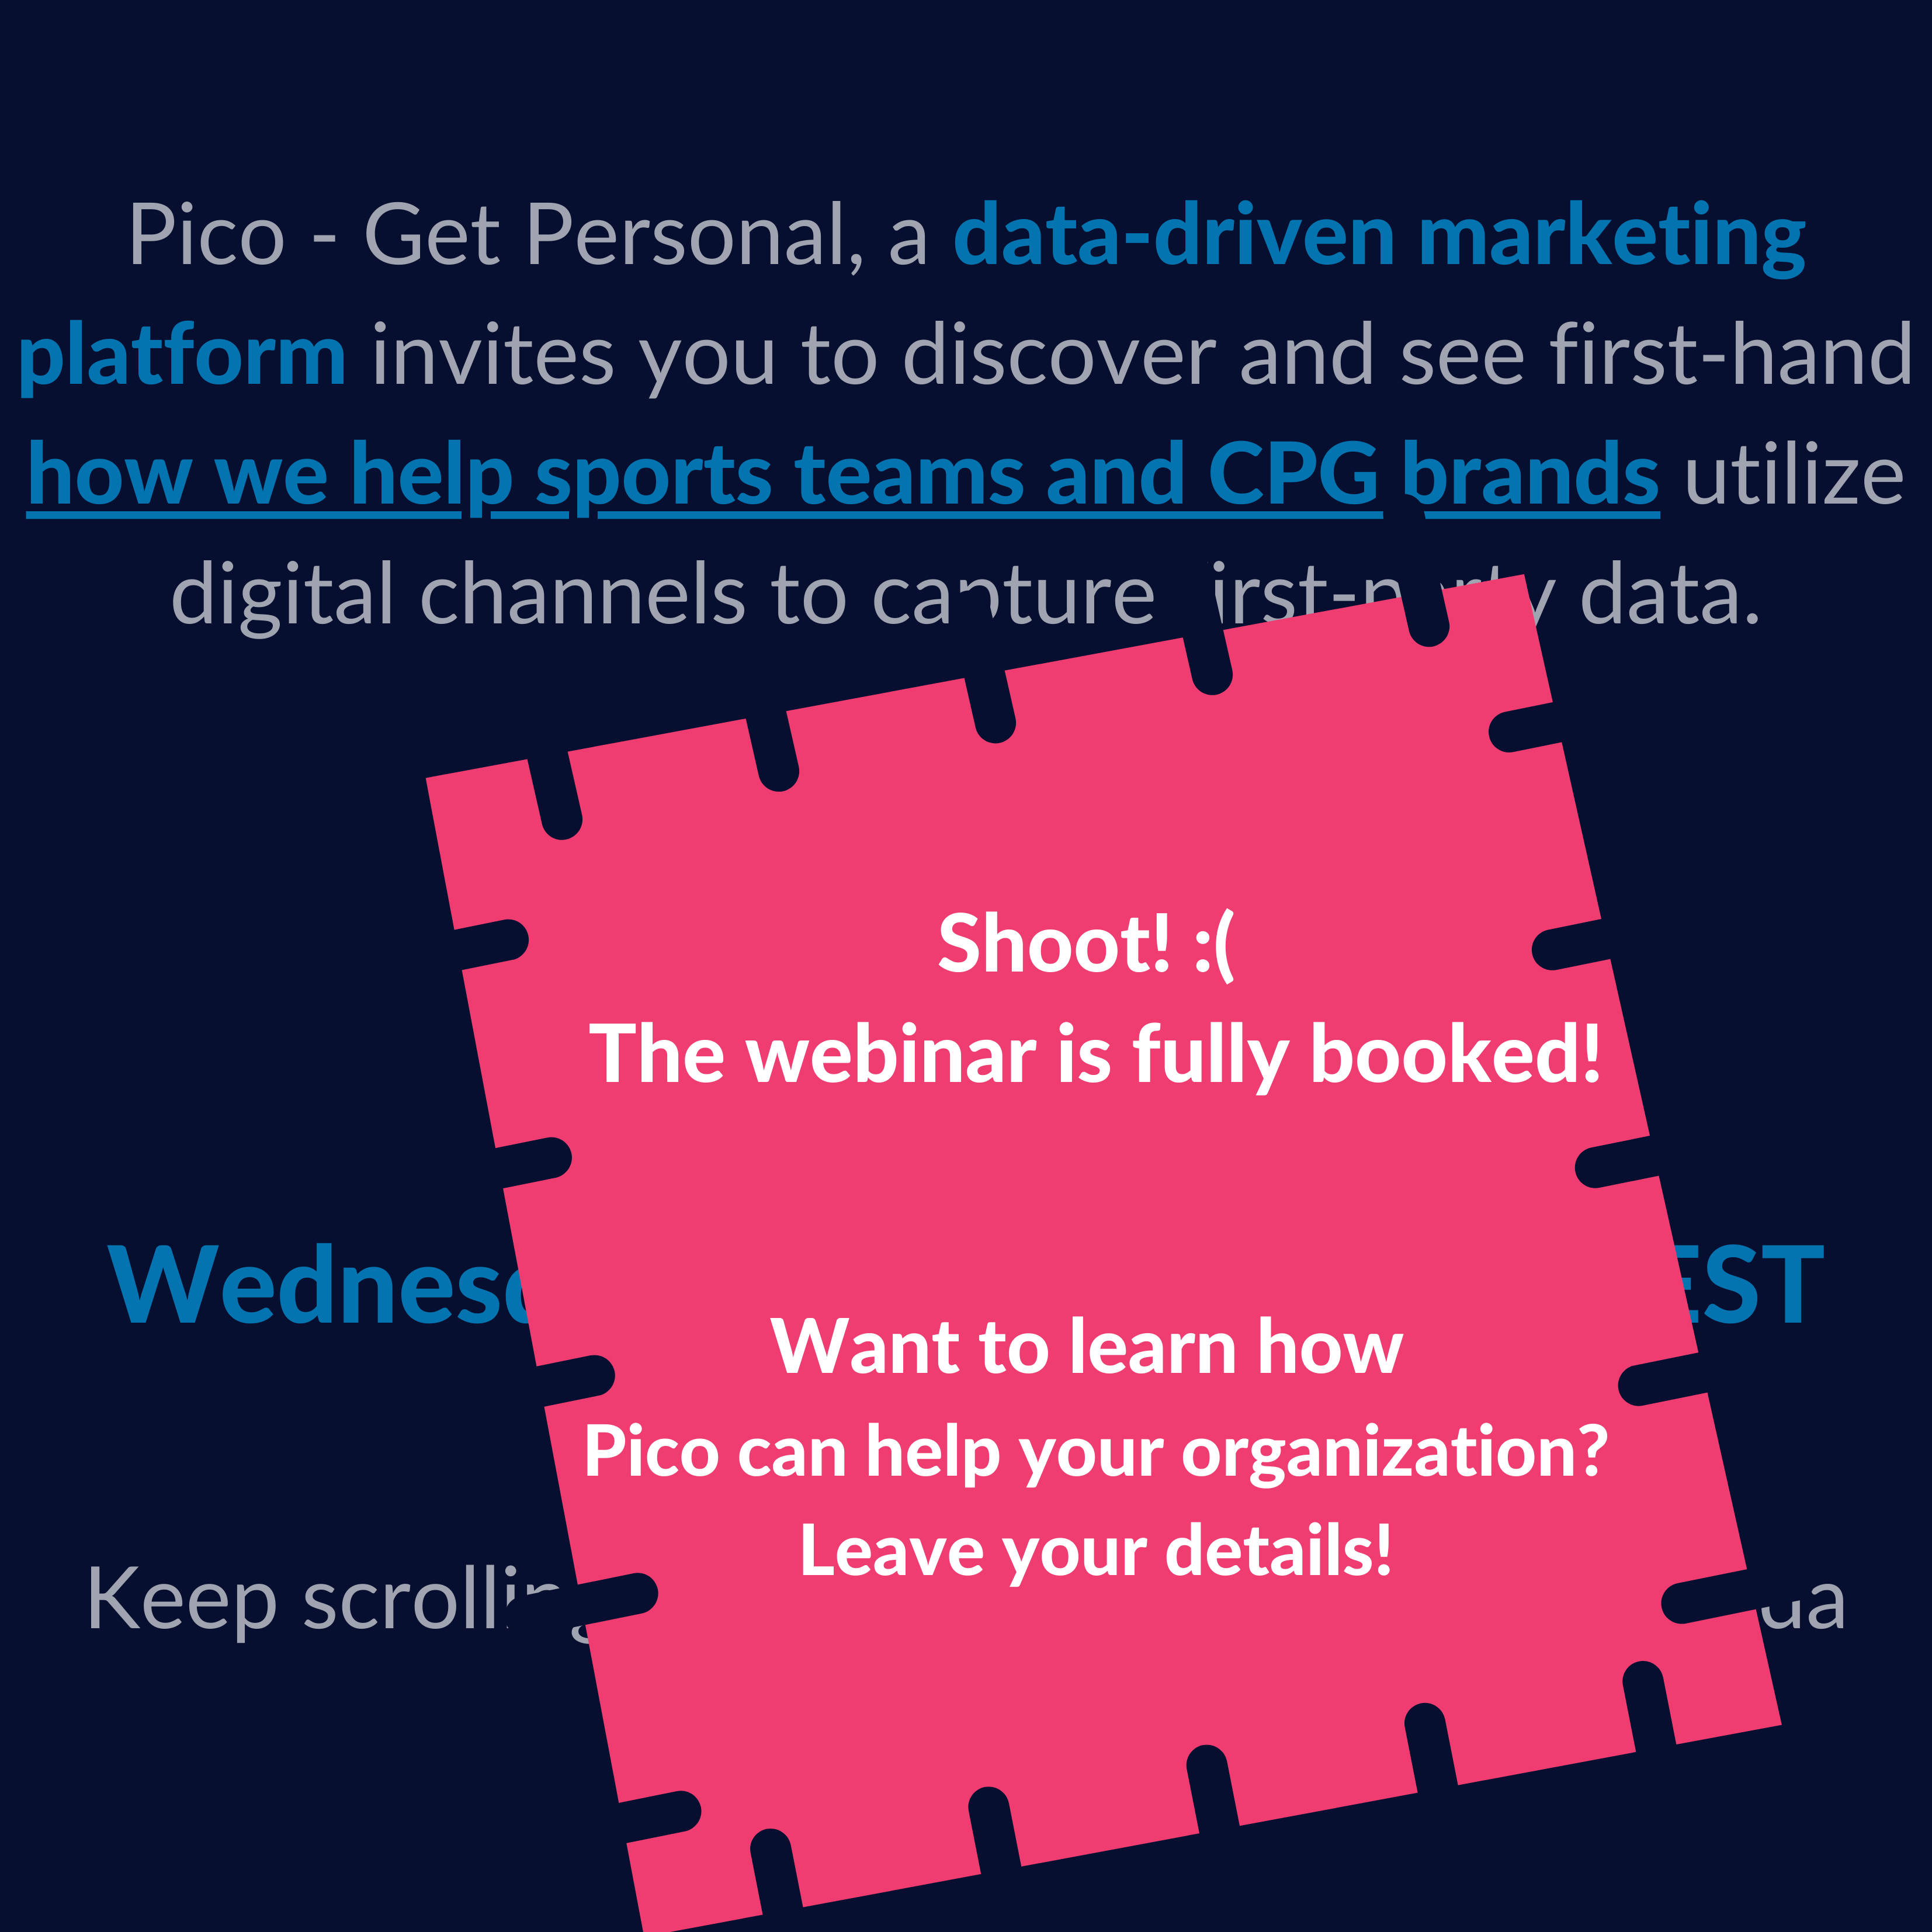 Pico - Get Personal, a data-driven marketing platform invites you to discover and see first-hand how we help sports teams and CPG brands utilize digital channels to capture first-party data. Join our Webinar on (5)